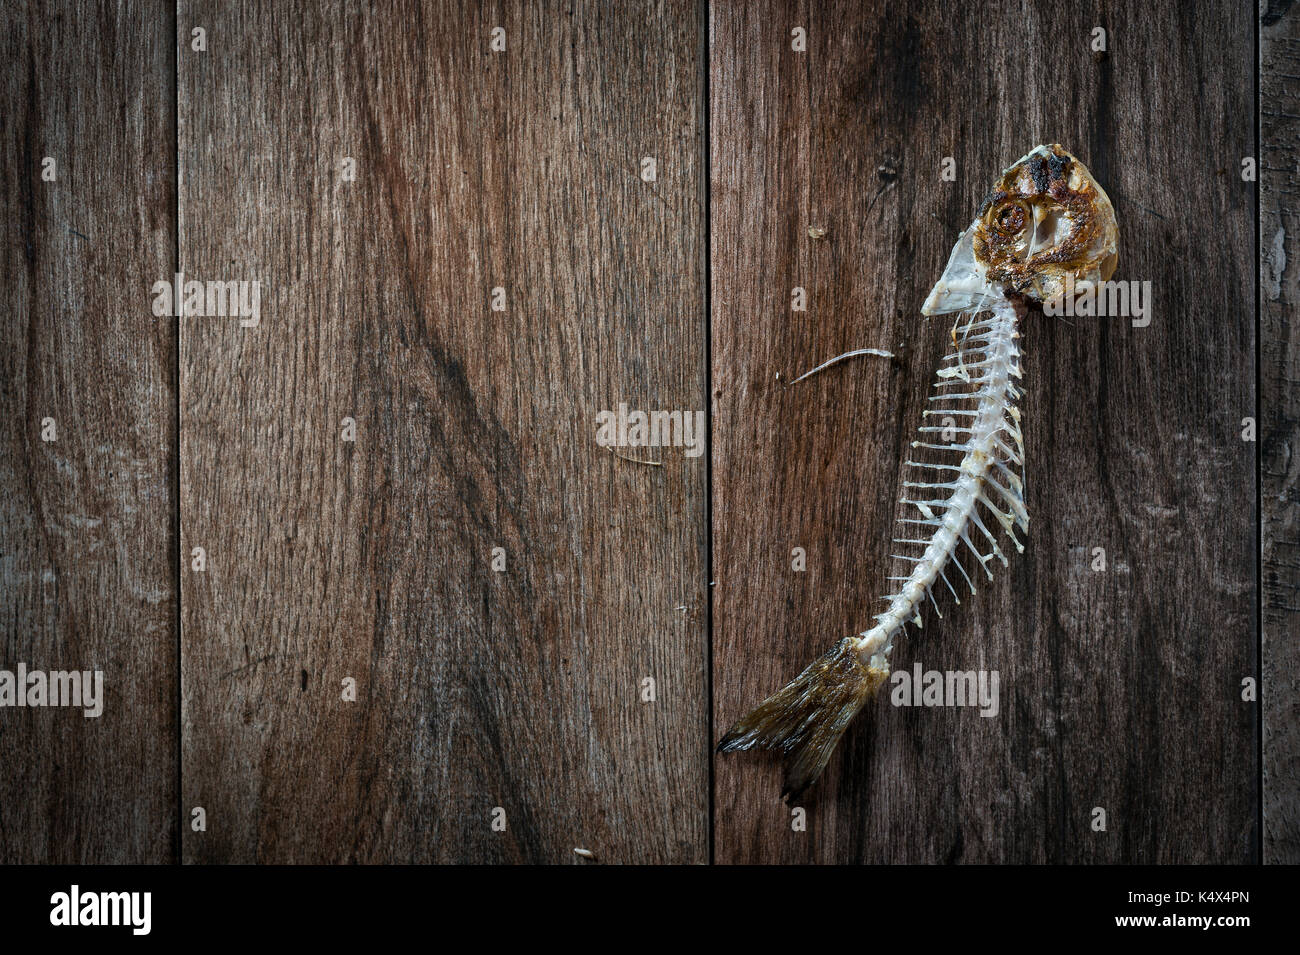 Fish bone on rustic wooden background. Some negative space around. Stock Photo